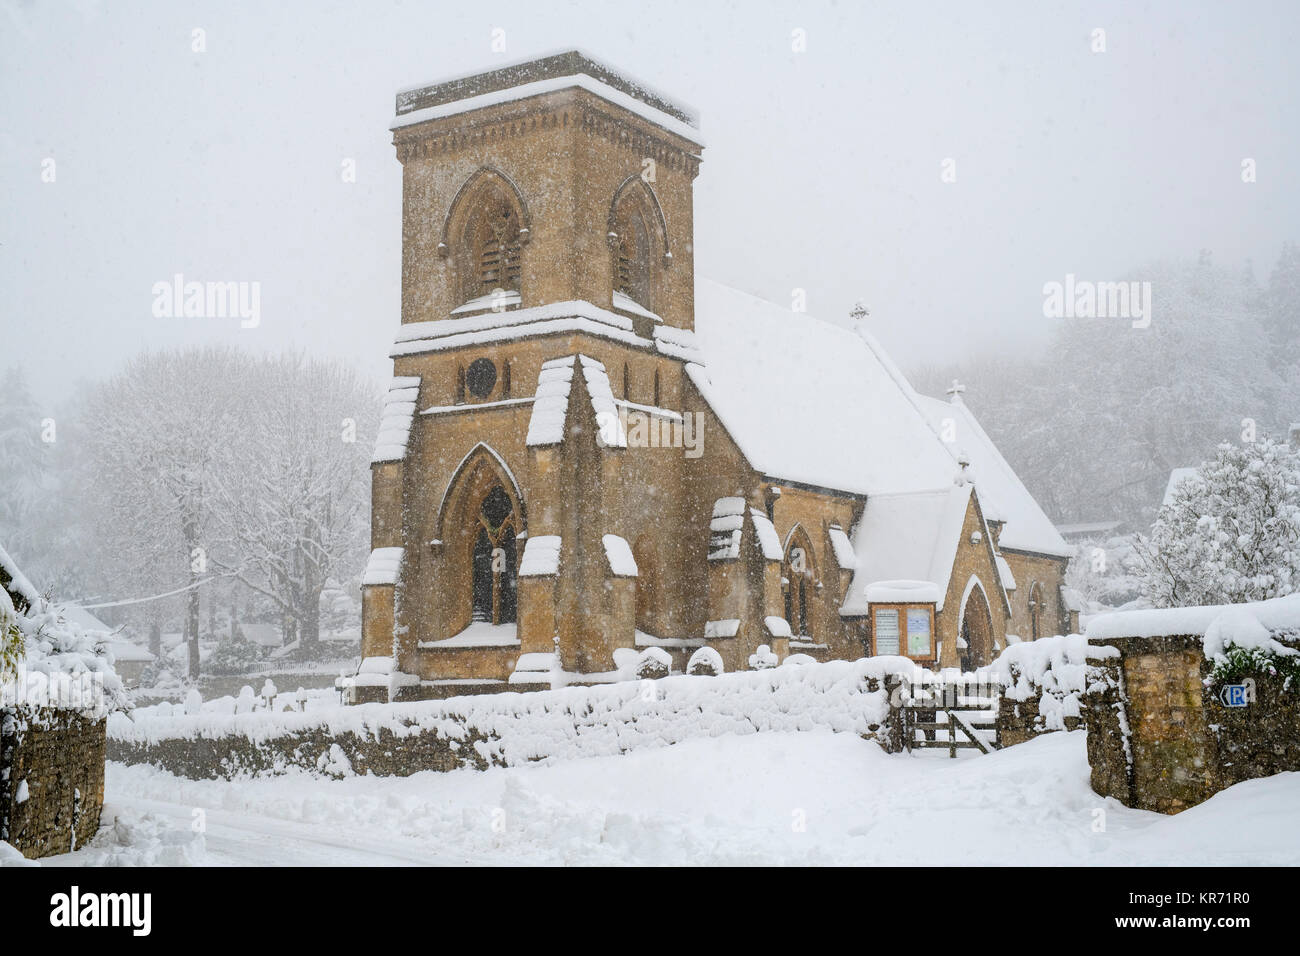 St. Barnabas Kirche in Snowshill Dorf im Schnee im Dezember. Snowshill, Cotswolds, Gloucestershire, England. Panoramablick Stockfoto